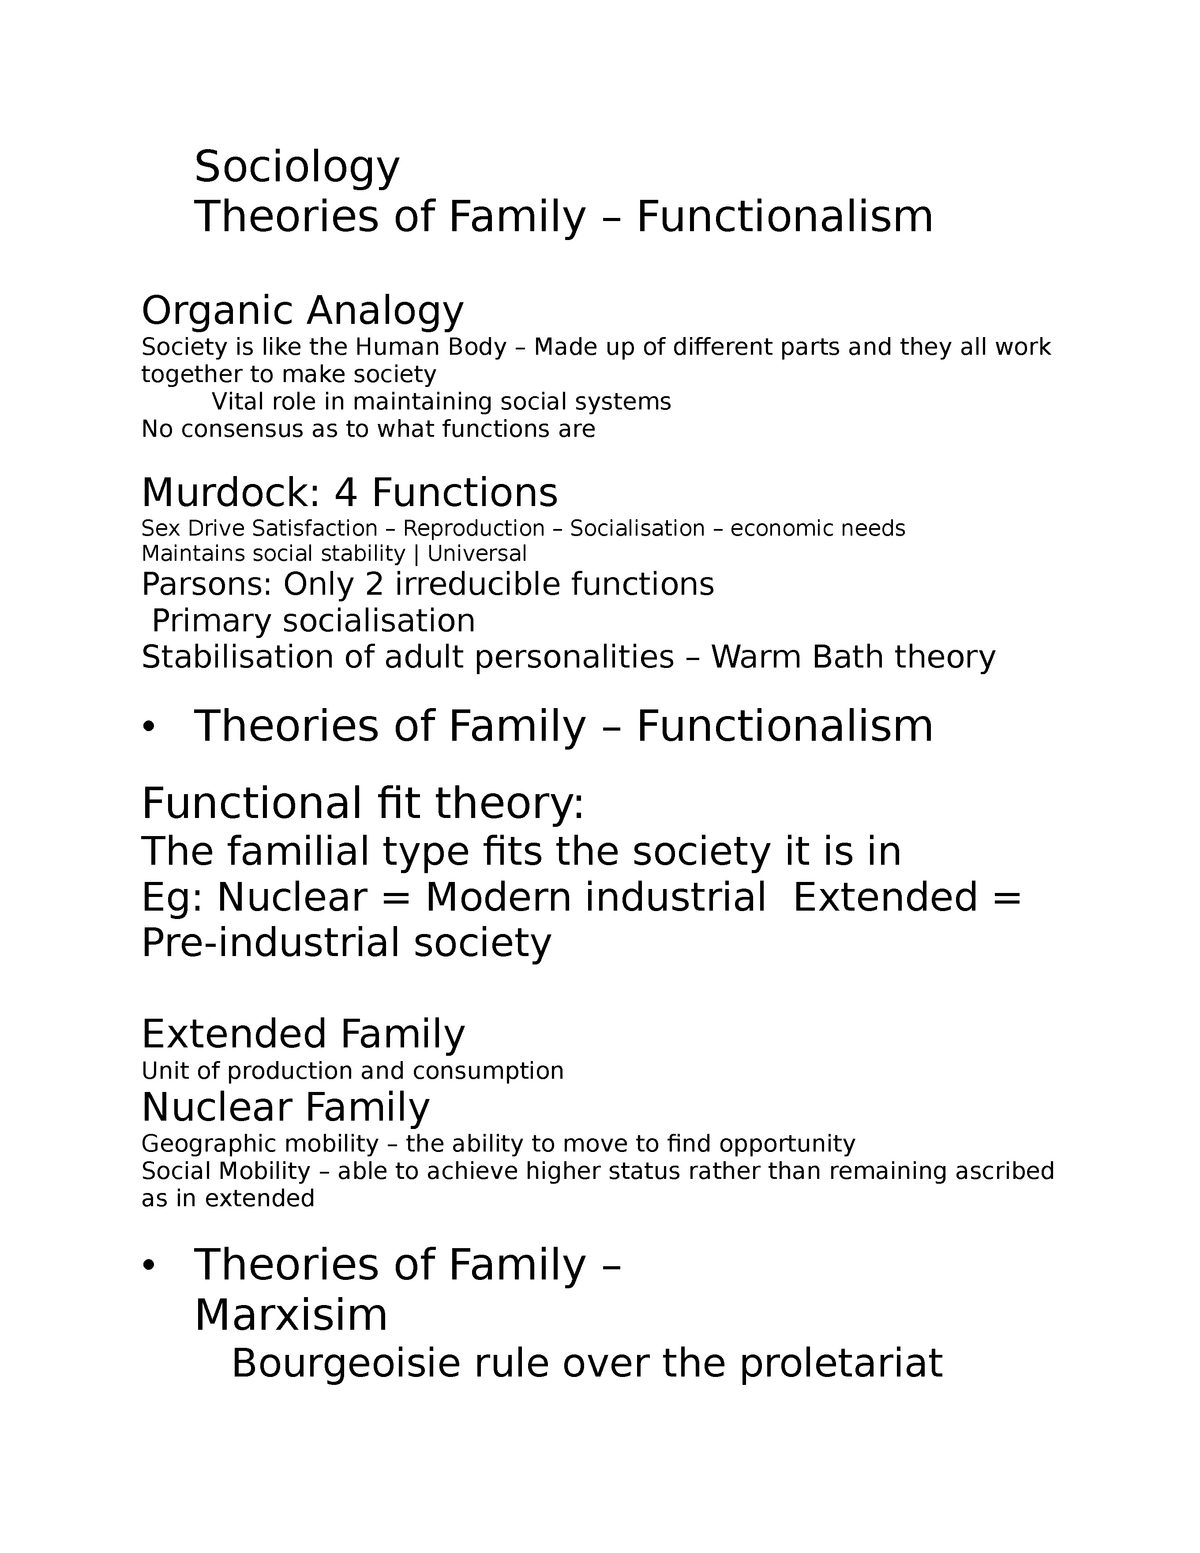 following structural functional theory the family